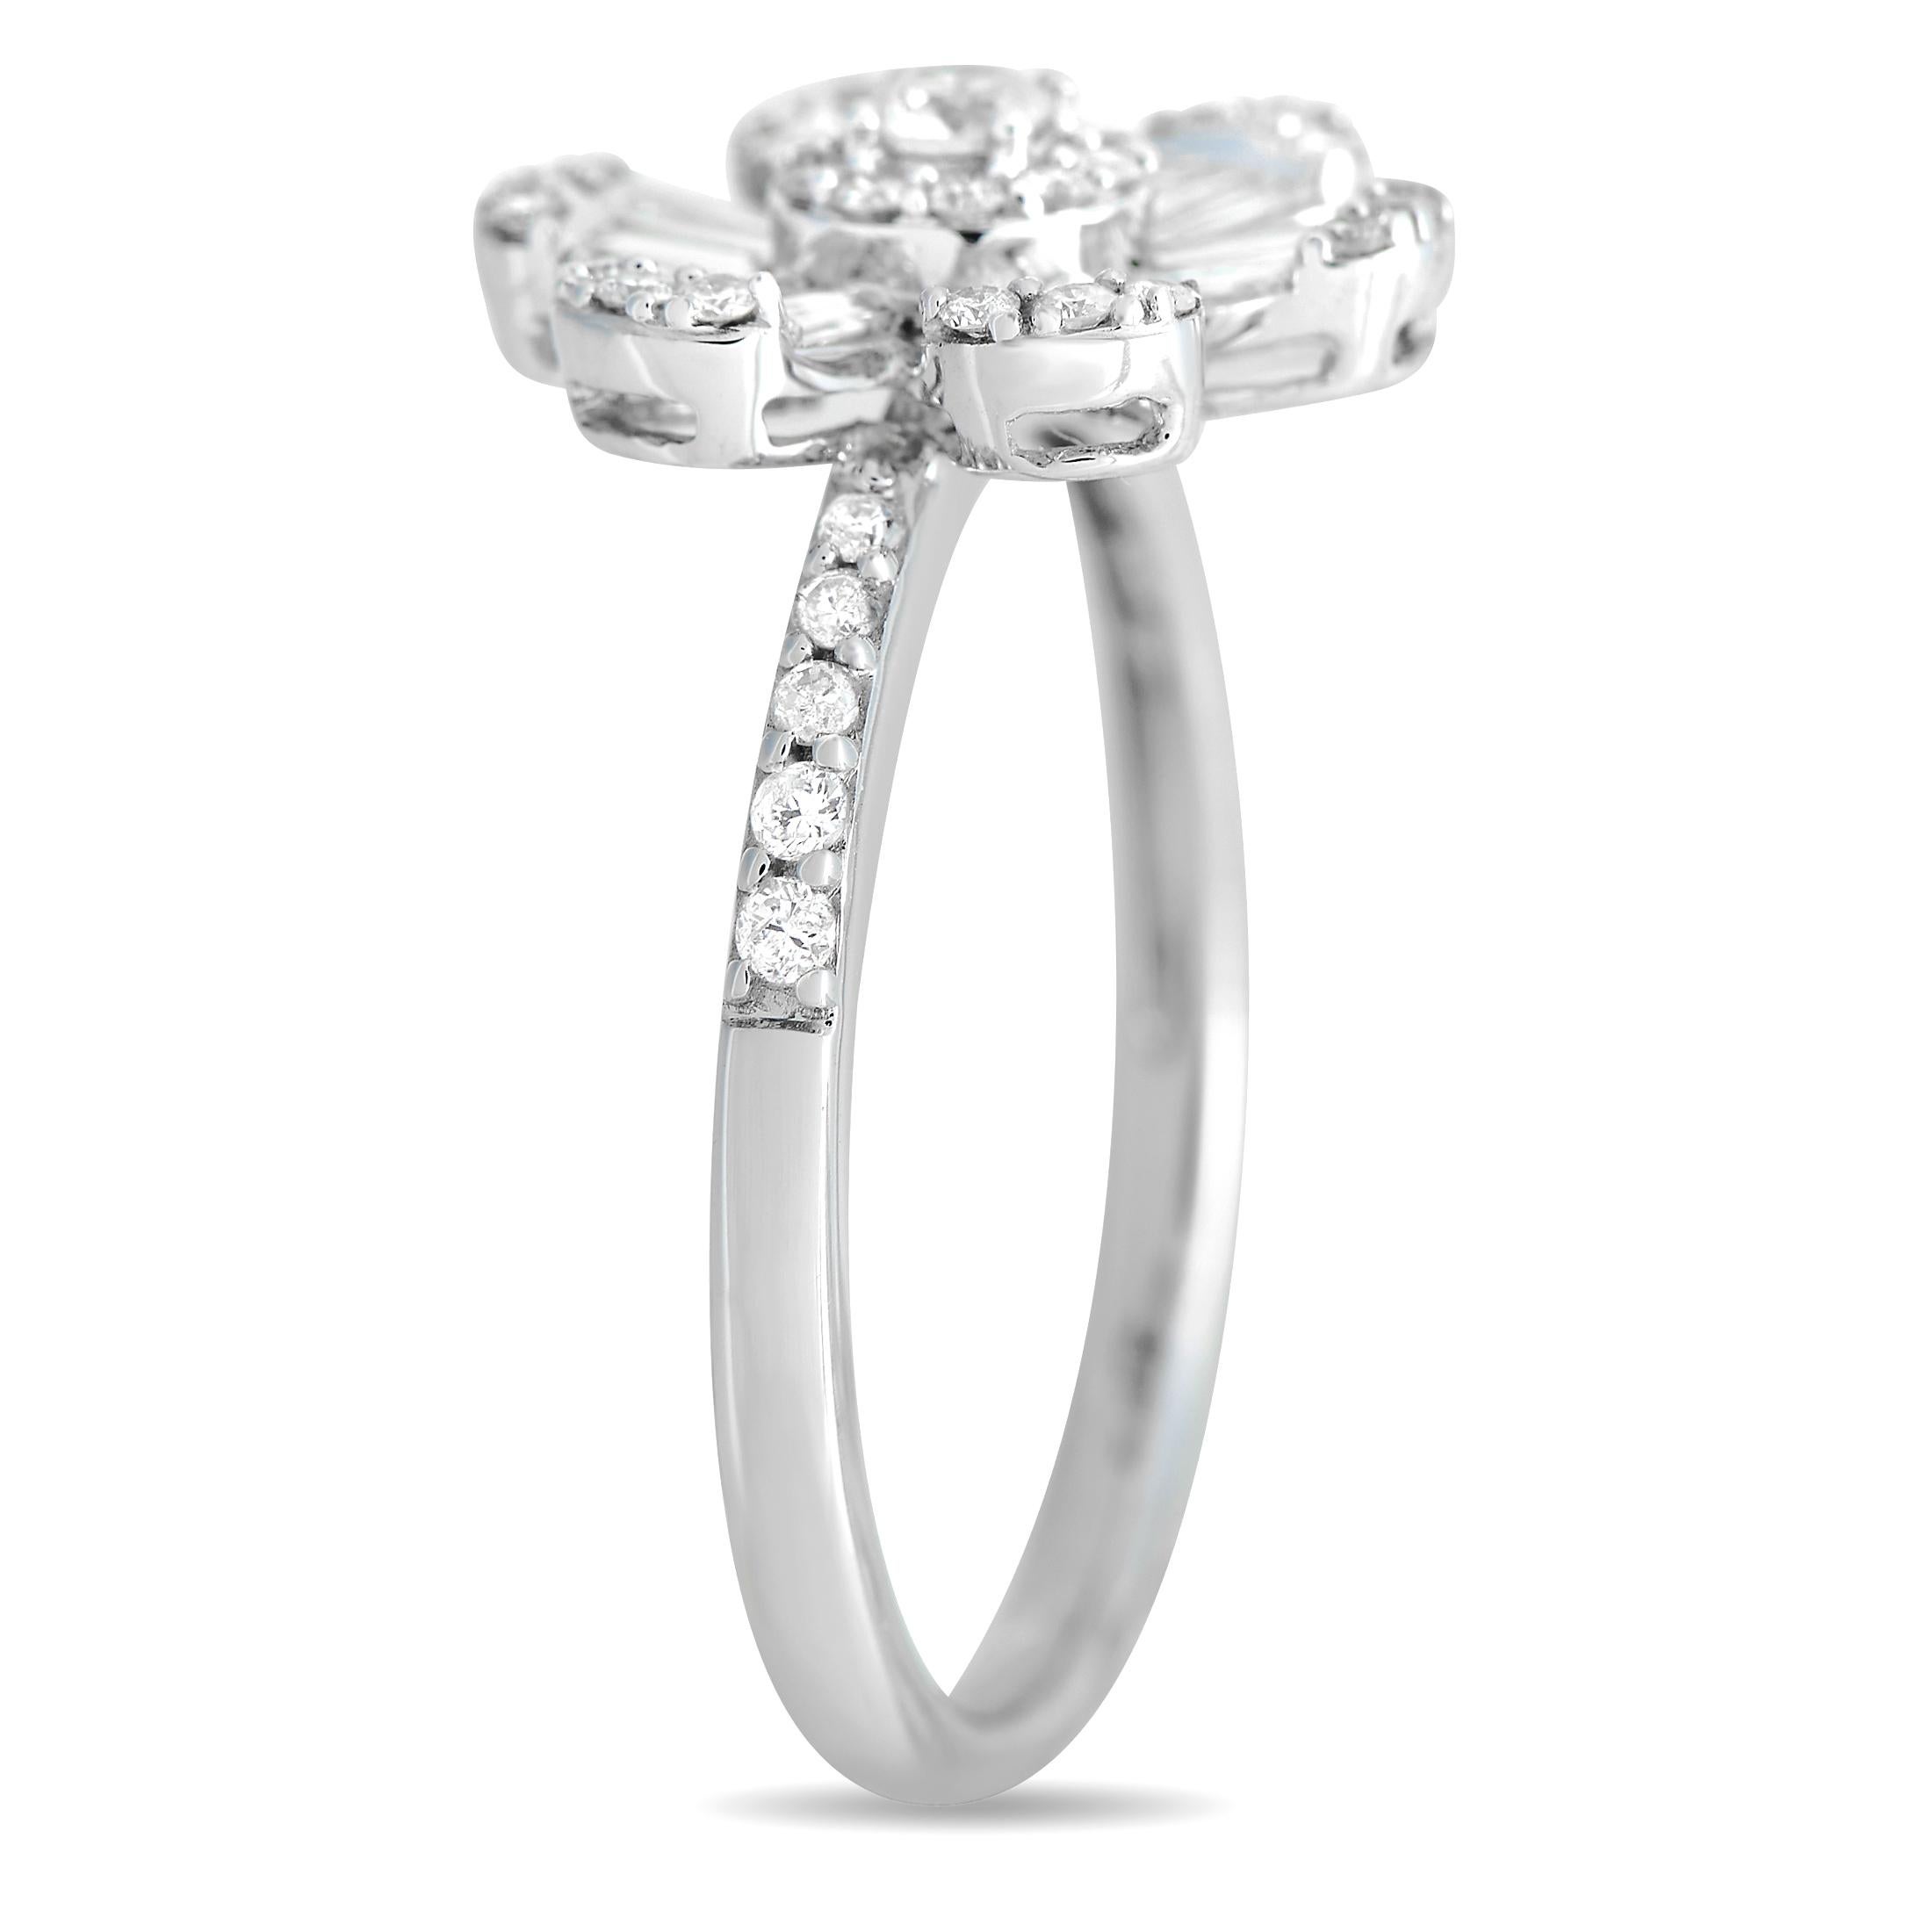 This ring's flower power and undeniable sparkle are sure to bring spring to your step. It is crafted in 14K white gold and has a chic, narrow band with shoulders daintily traced with diamonds. The focal point is an oversized flower centerpiece with